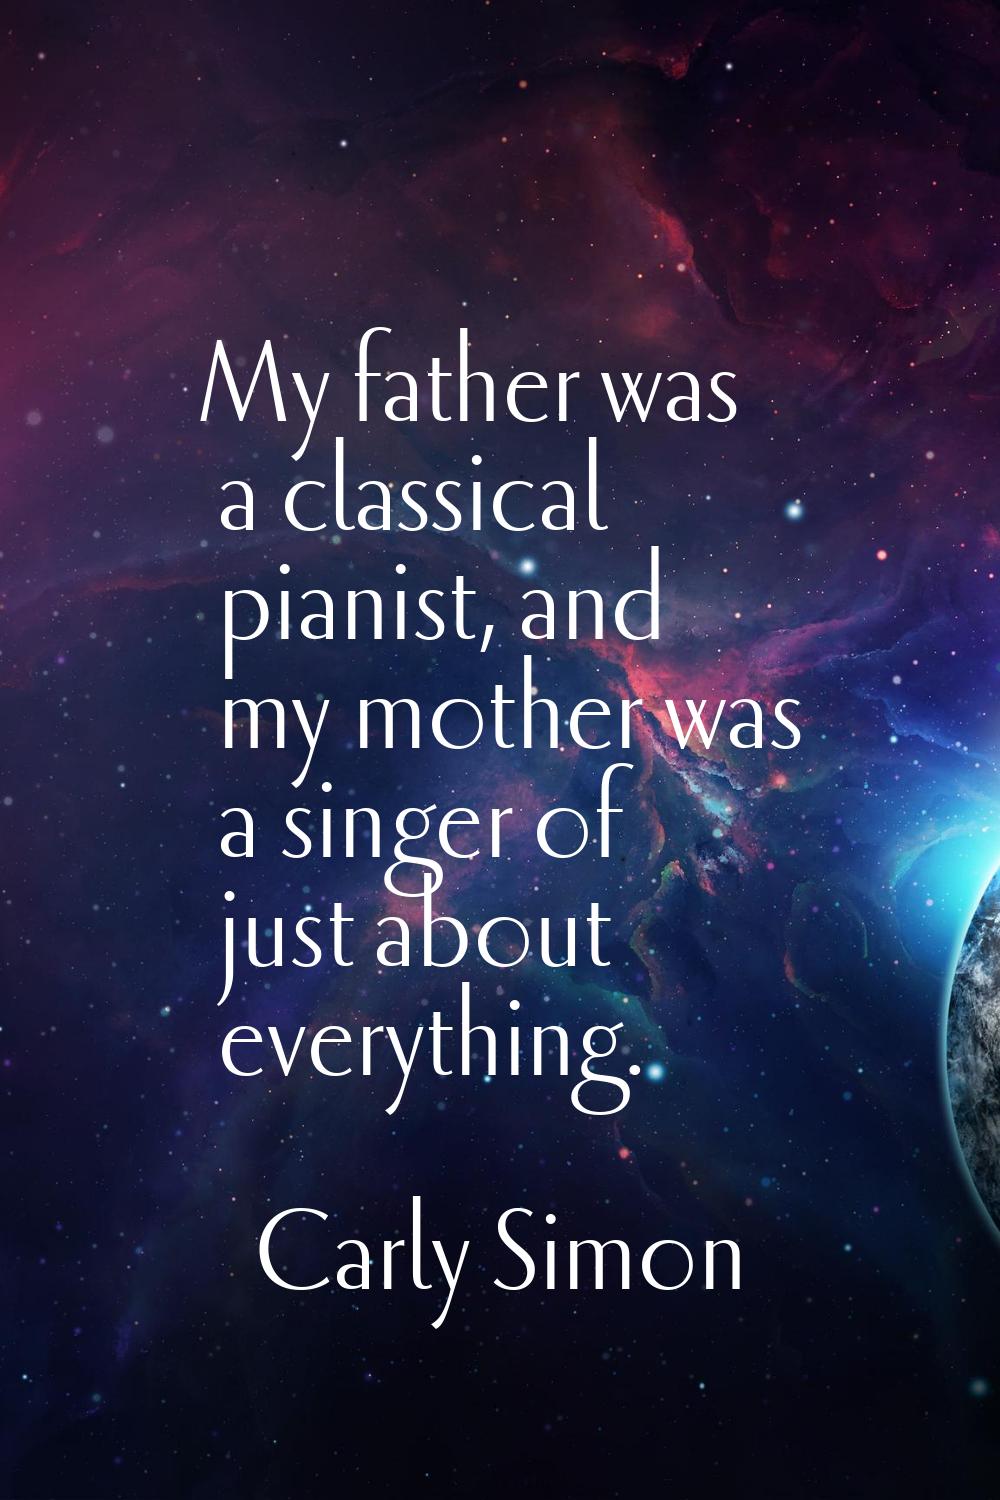 My father was a classical pianist, and my mother was a singer of just about everything.